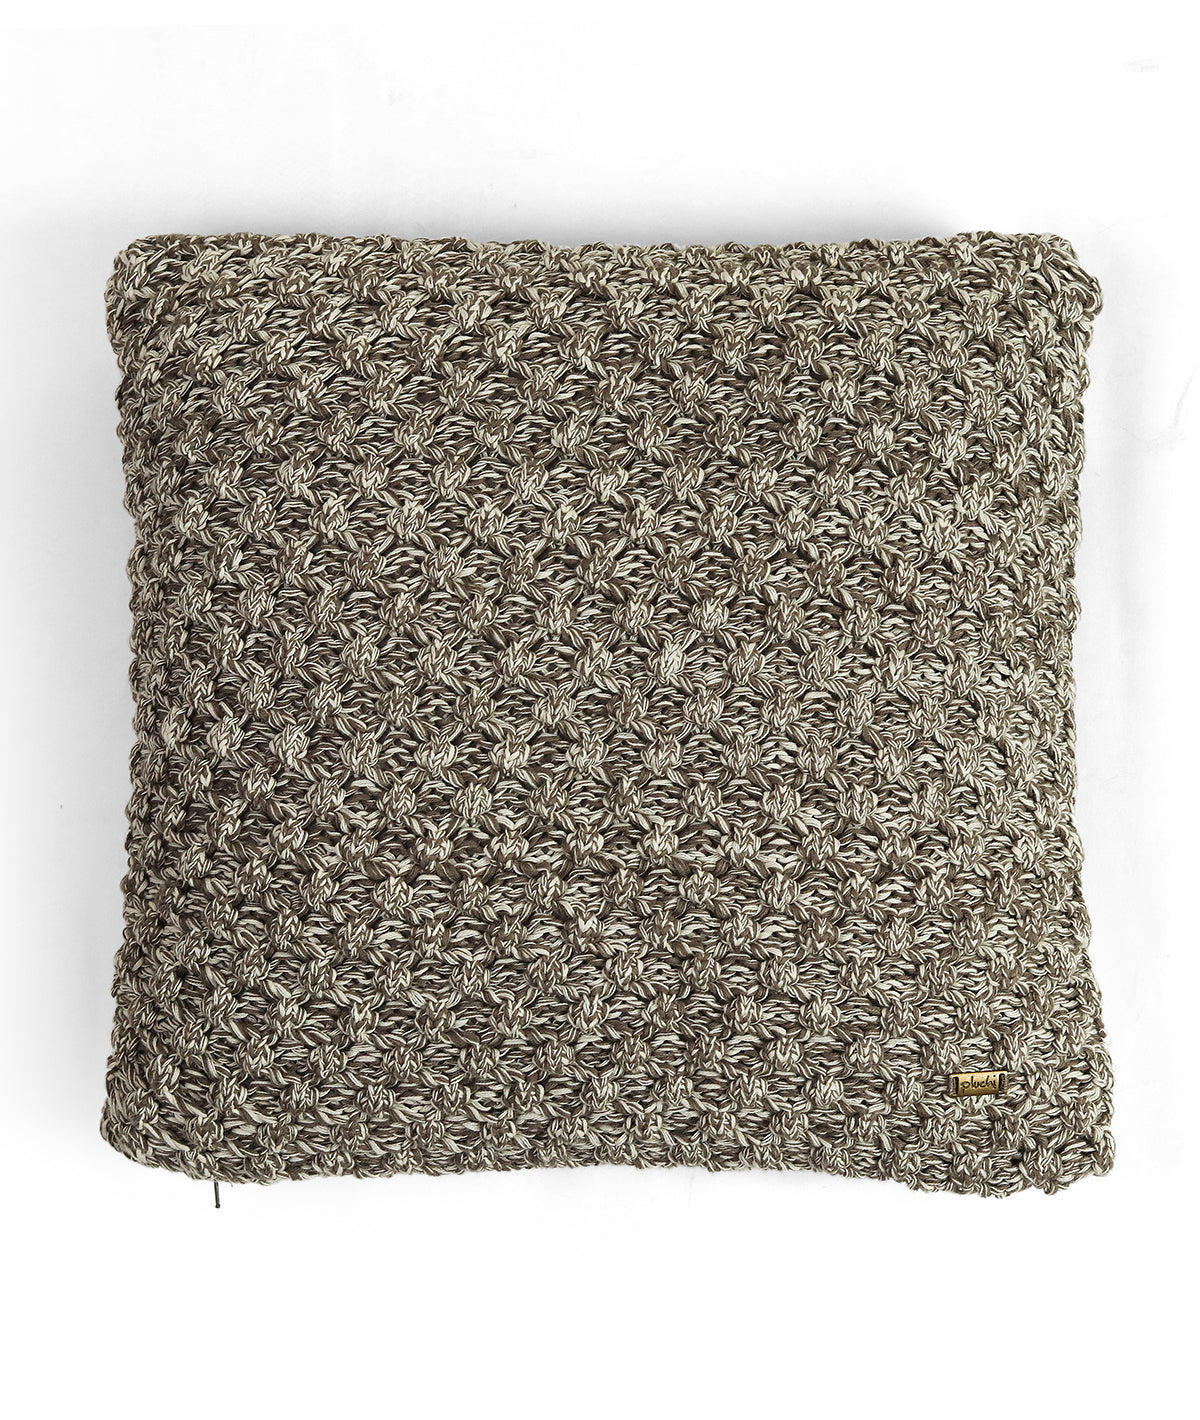 Popcorn Dark Pewter & Natural Cotton Knitted Decorative 16 X 16 Inches Cushion Cover